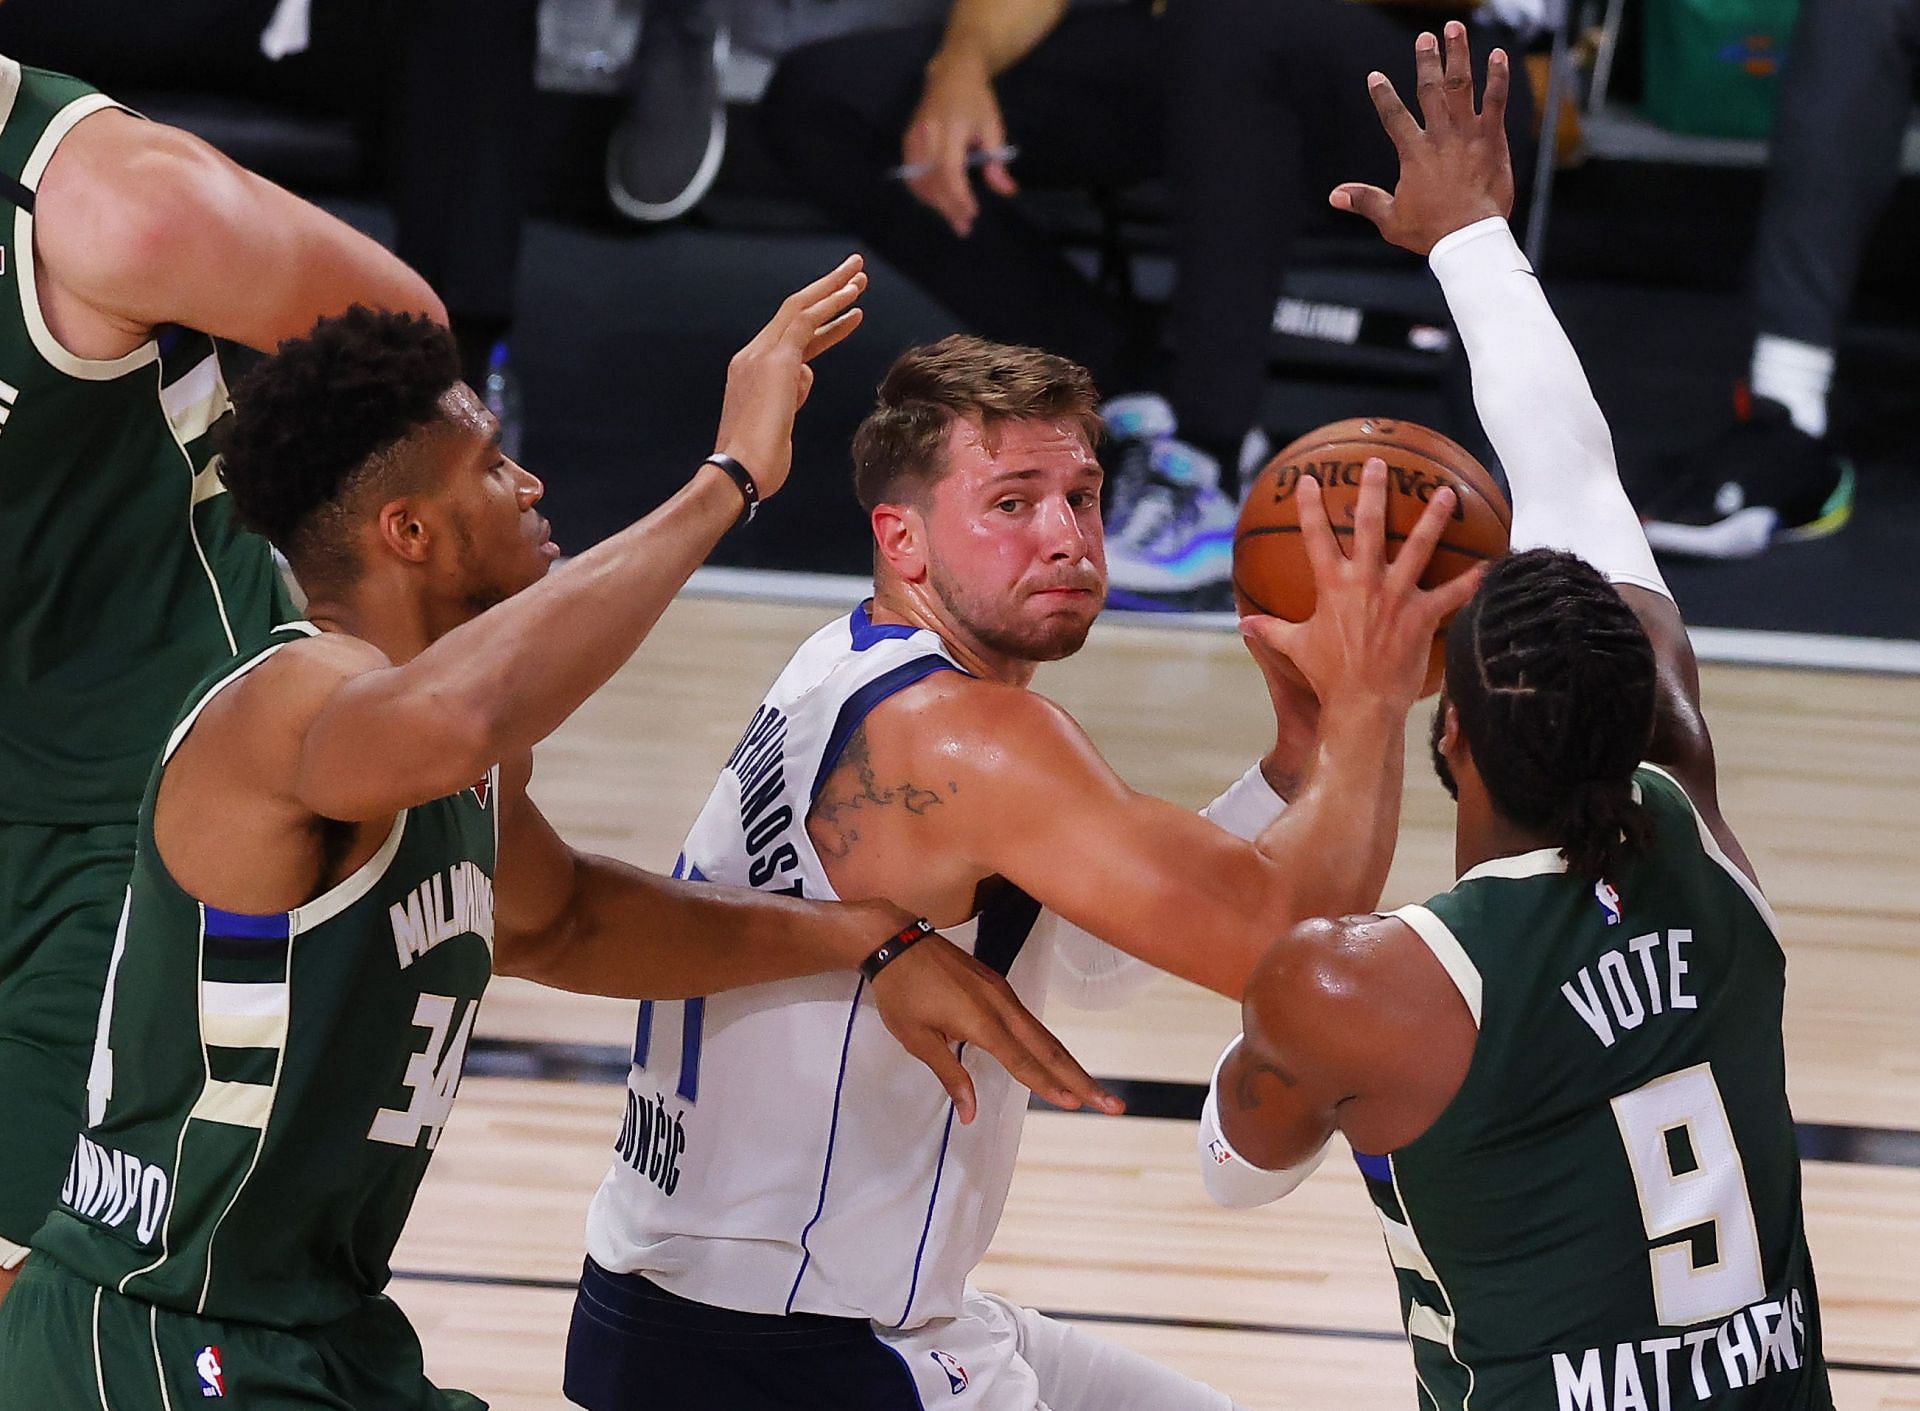 Giannis Antetokounmpo (left) and Luka Doncic are two of the most talented players in the NBA right now